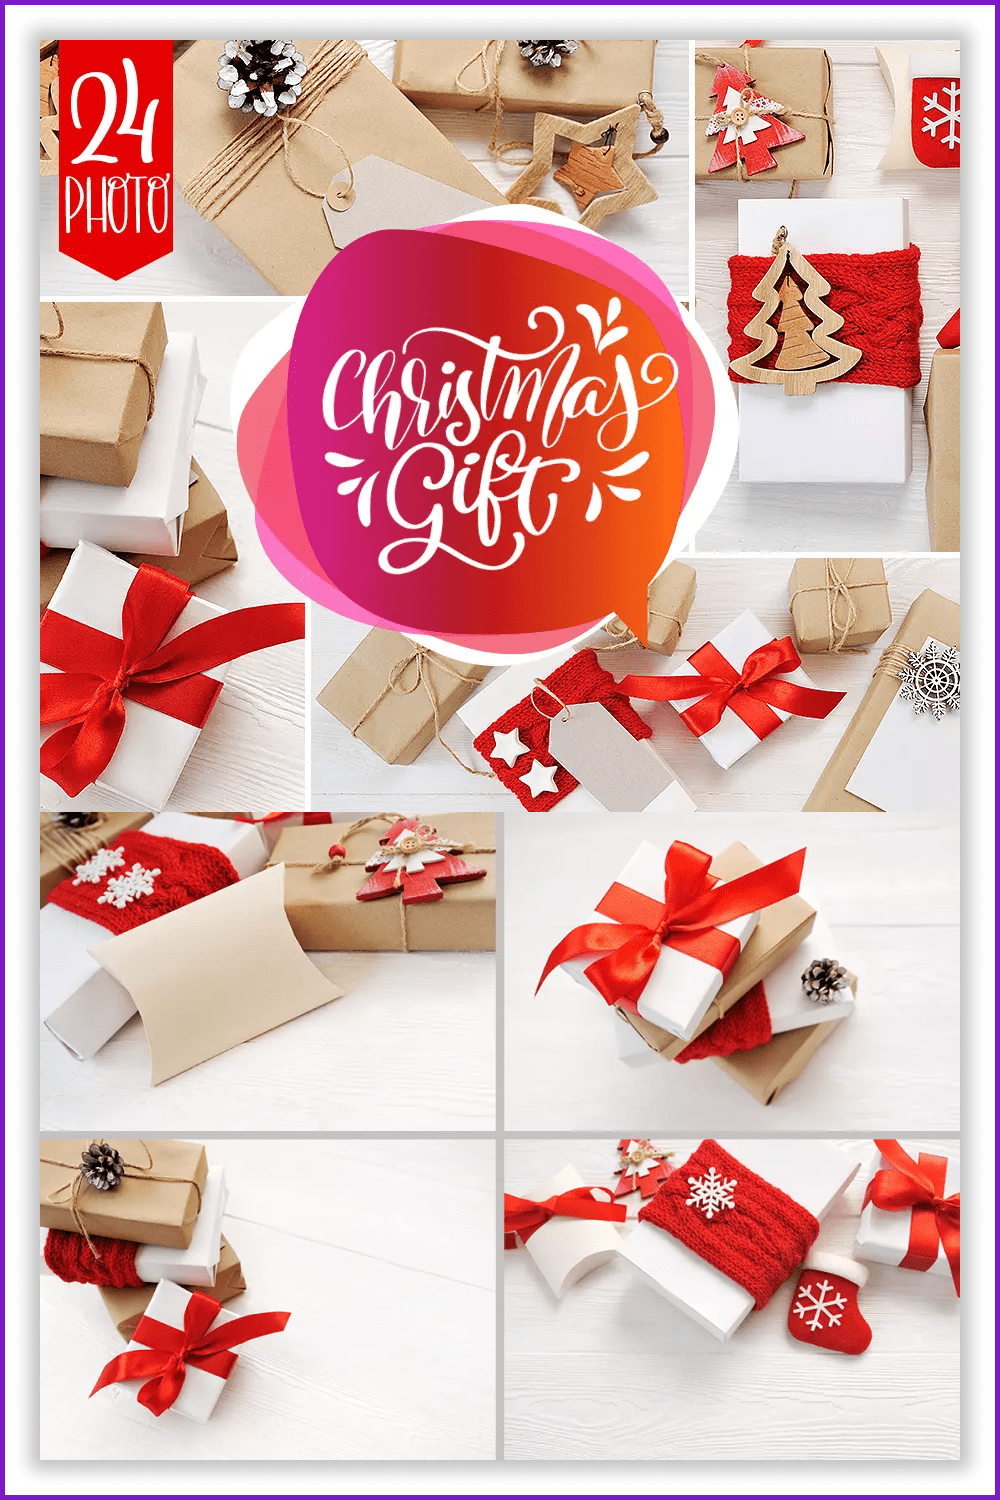 Collage of bright photos of gift boxes with red bows.